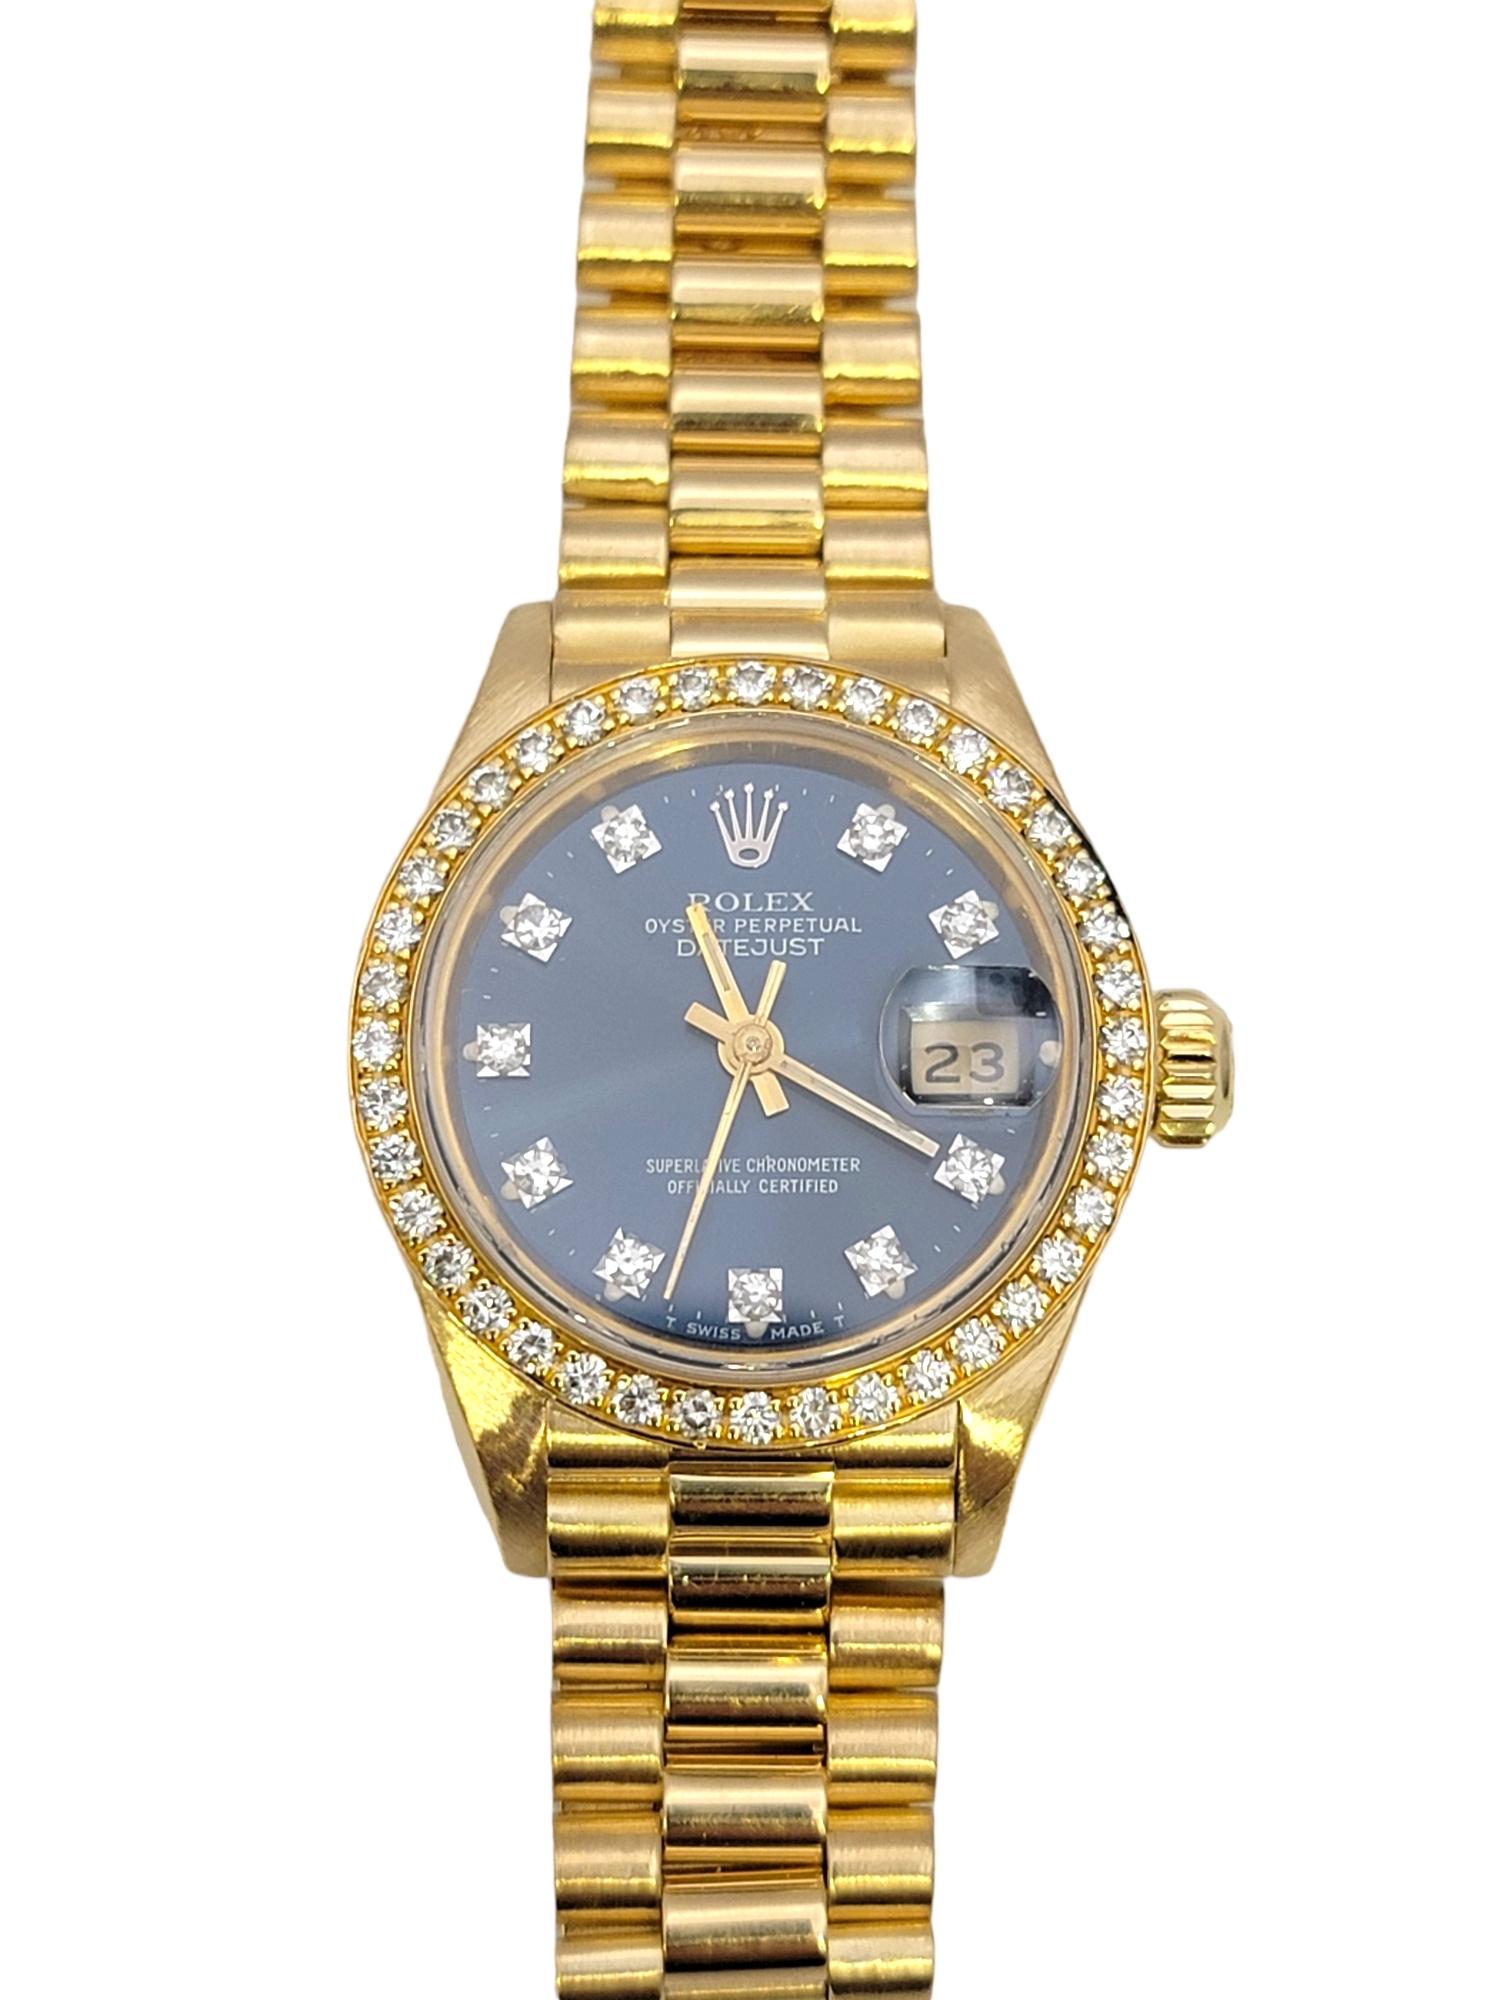 Incredible ladies Rolex datejust perpetual wristwatch. This stunning, high quality designer timepiece is embellished with shimmering natural diamonds and is made of 18 karat yellow gold. This beautiful, feminine piece looks elegant and sophisticated